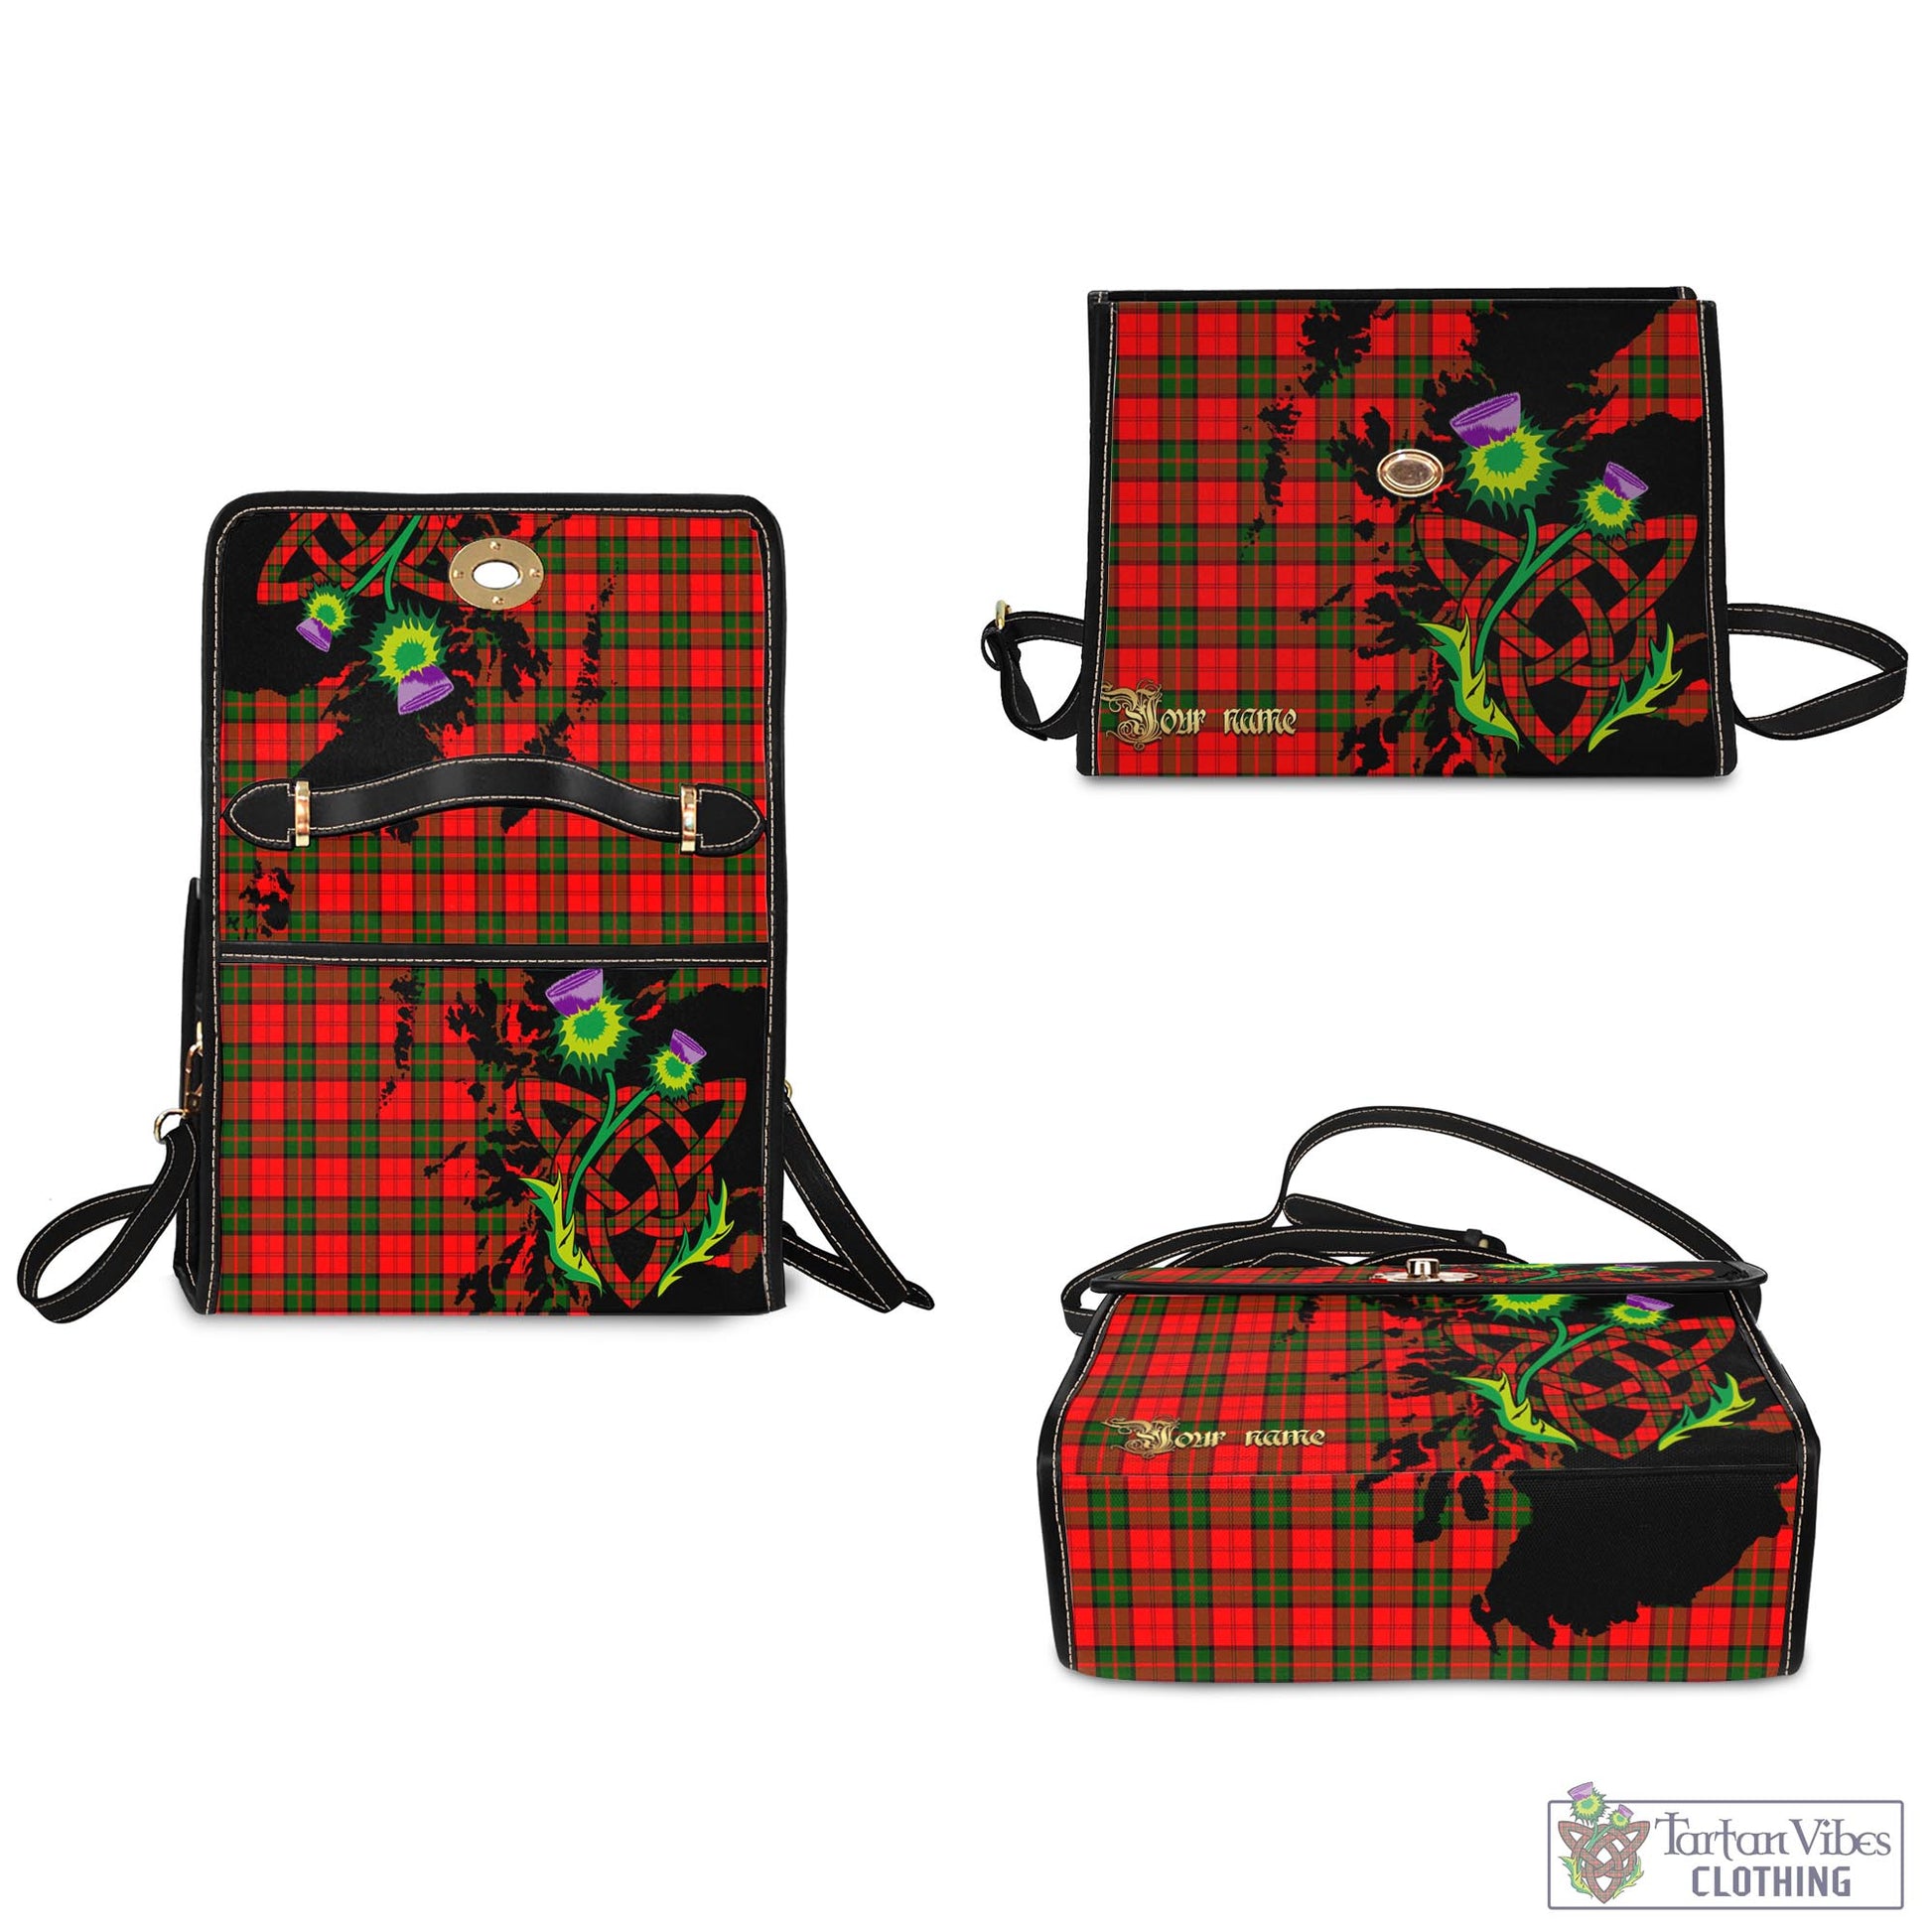 Tartan Vibes Clothing Dunbar Modern Tartan Waterproof Canvas Bag with Scotland Map and Thistle Celtic Accents